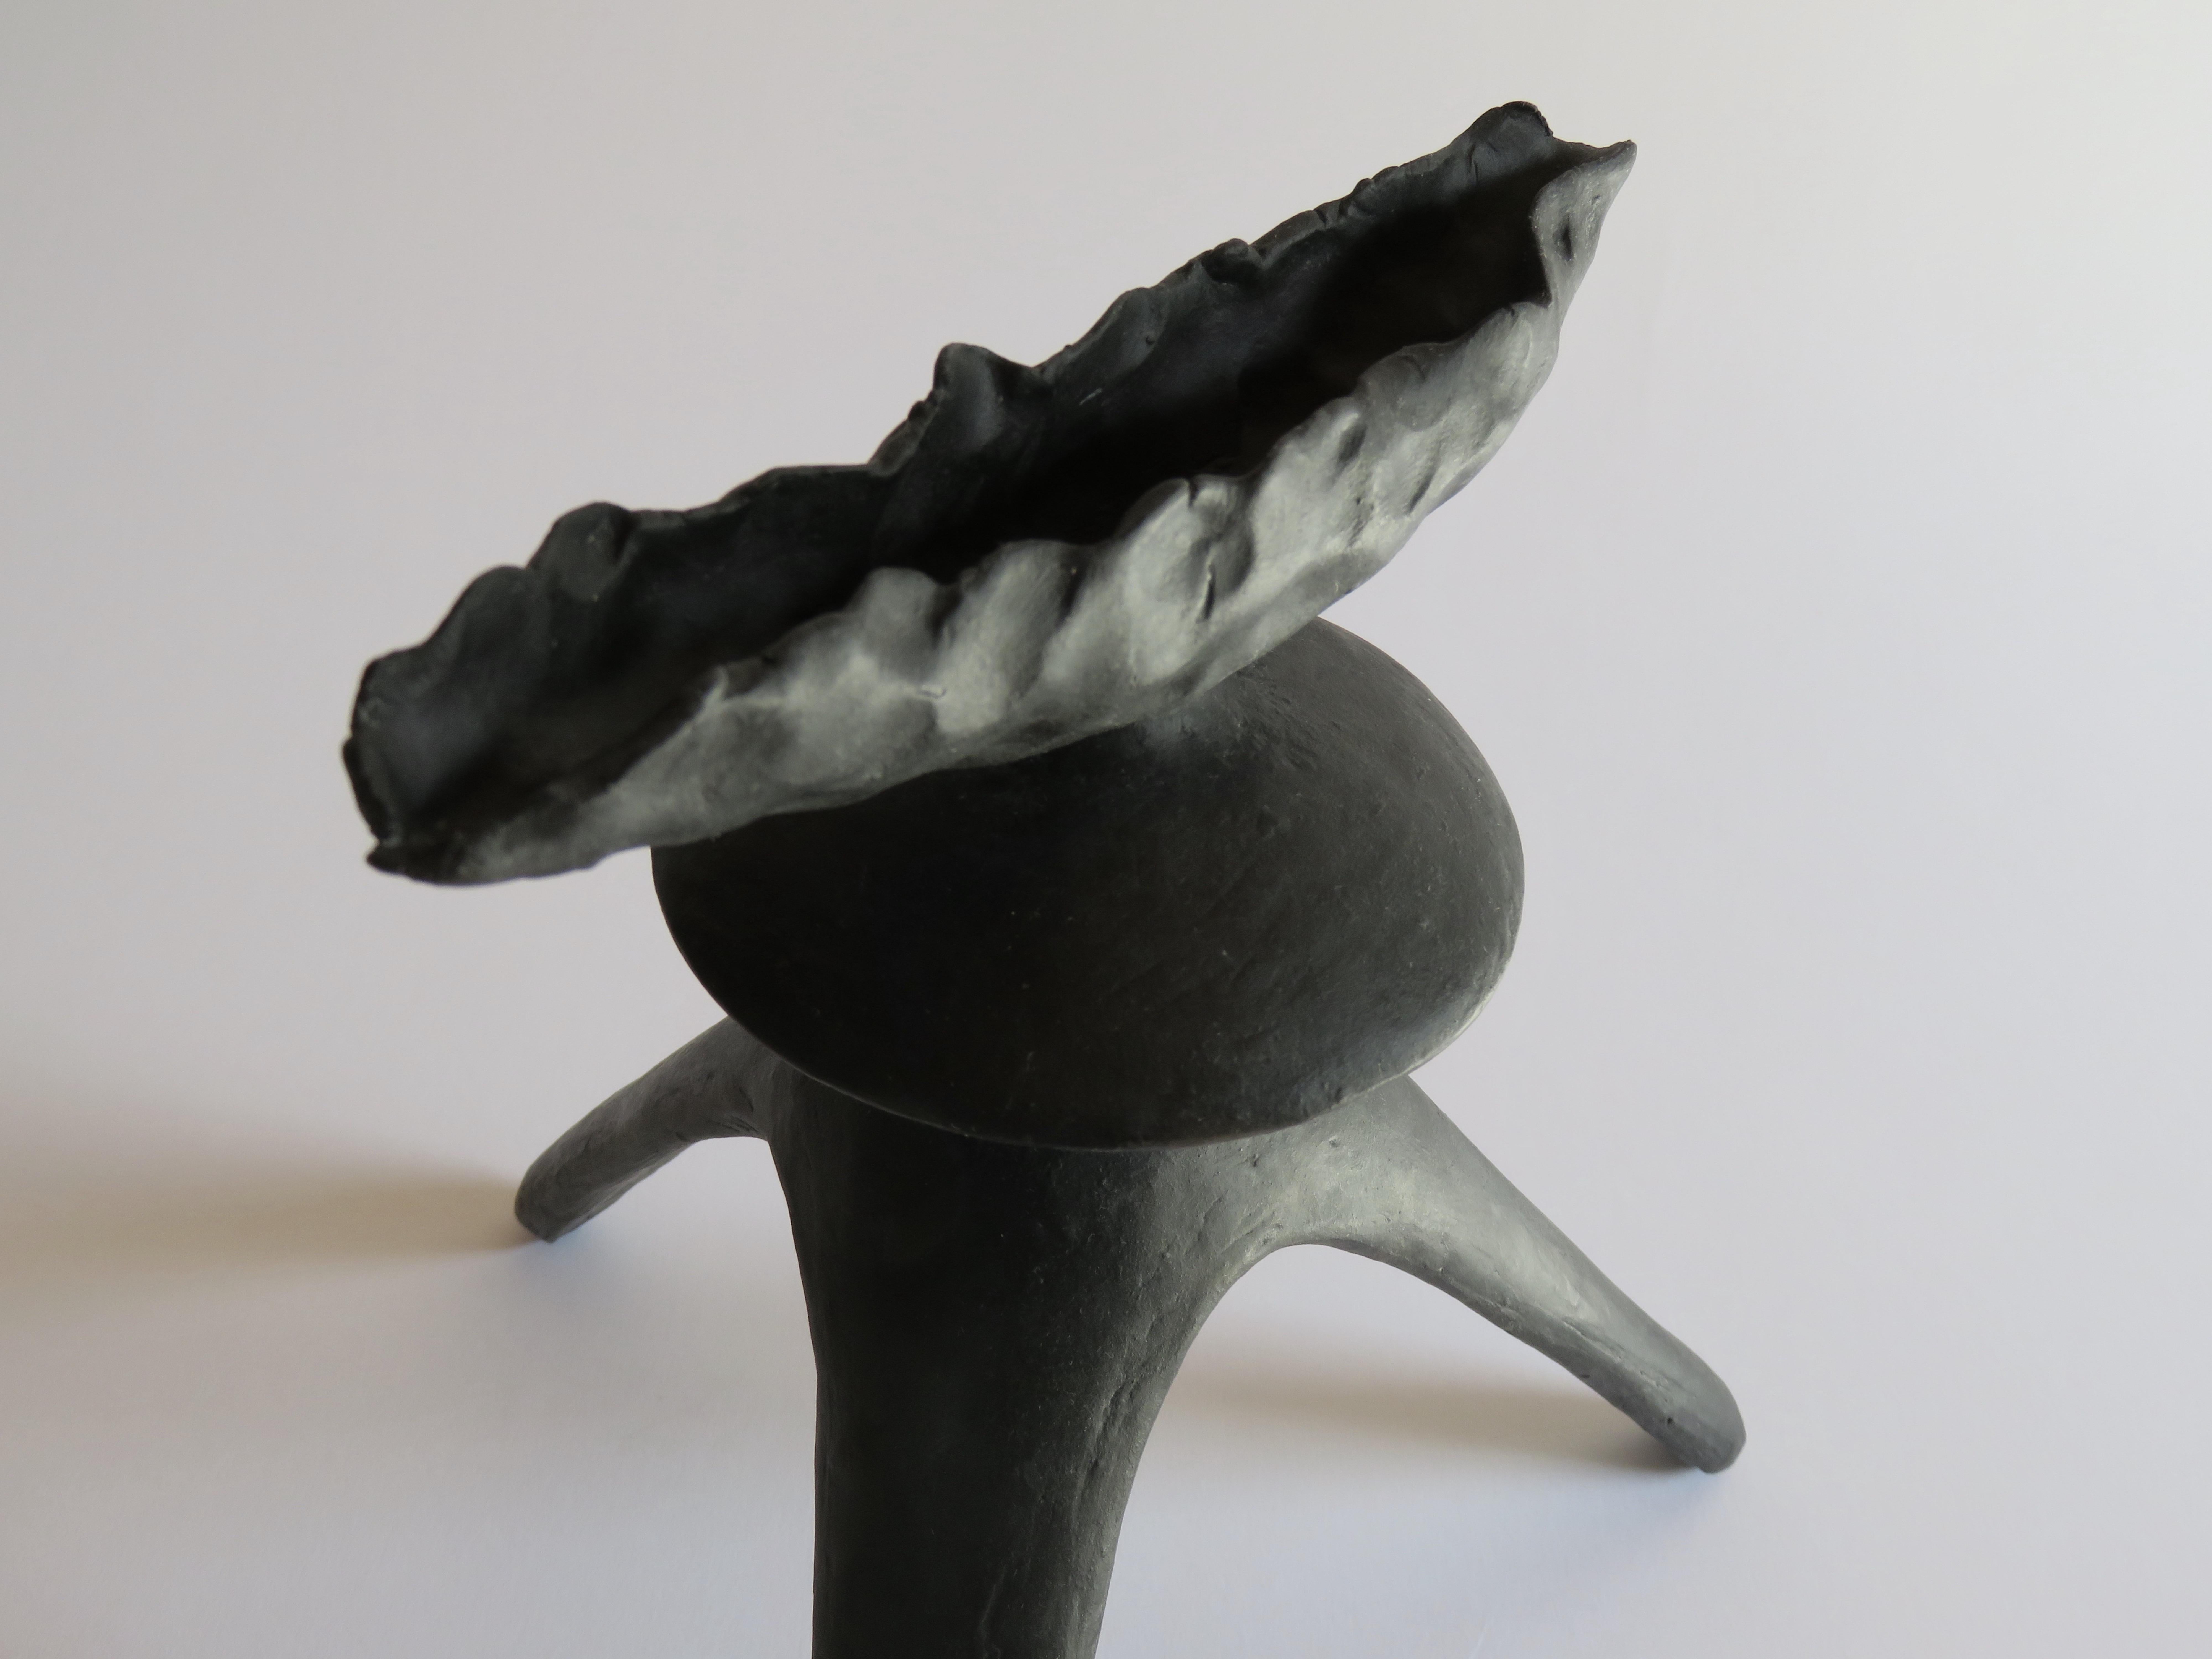 Crimped-Top Black Ceramic TOTEM with Middle Sphere on Tripod Legs, Hand Built 6